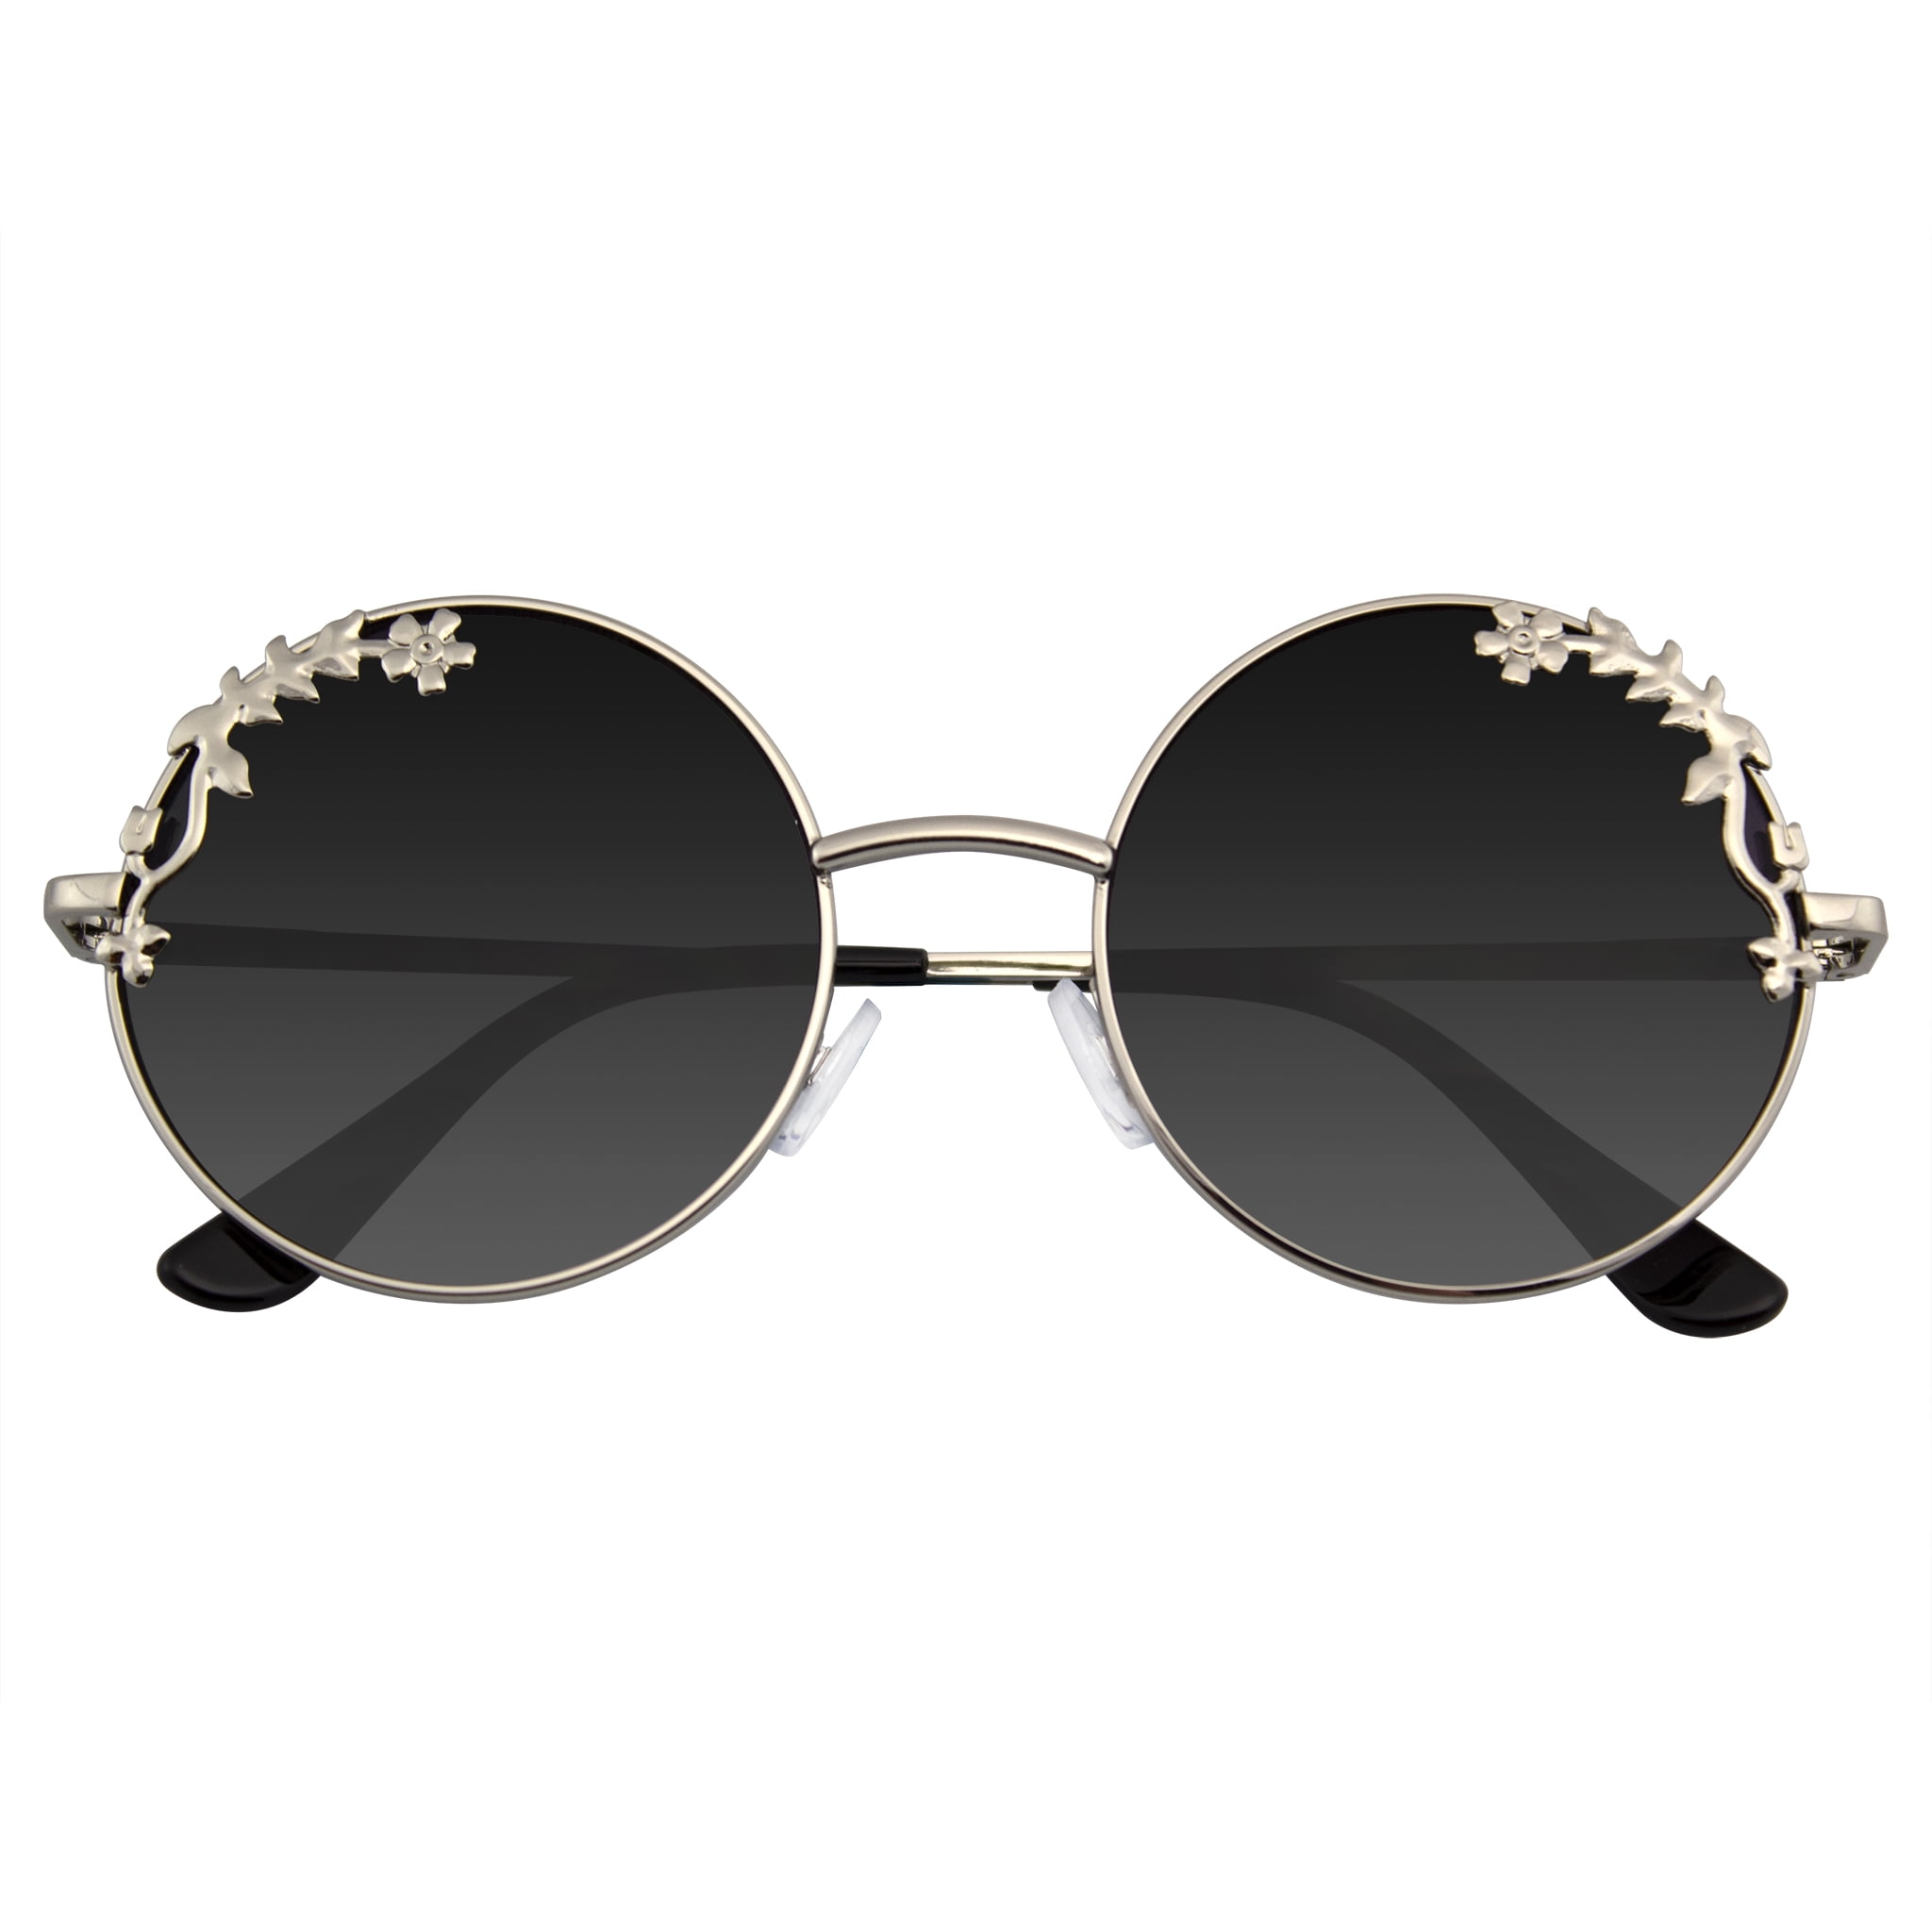 Boho | Sunglasses from Peepers - Peepers by PeeperSpecs